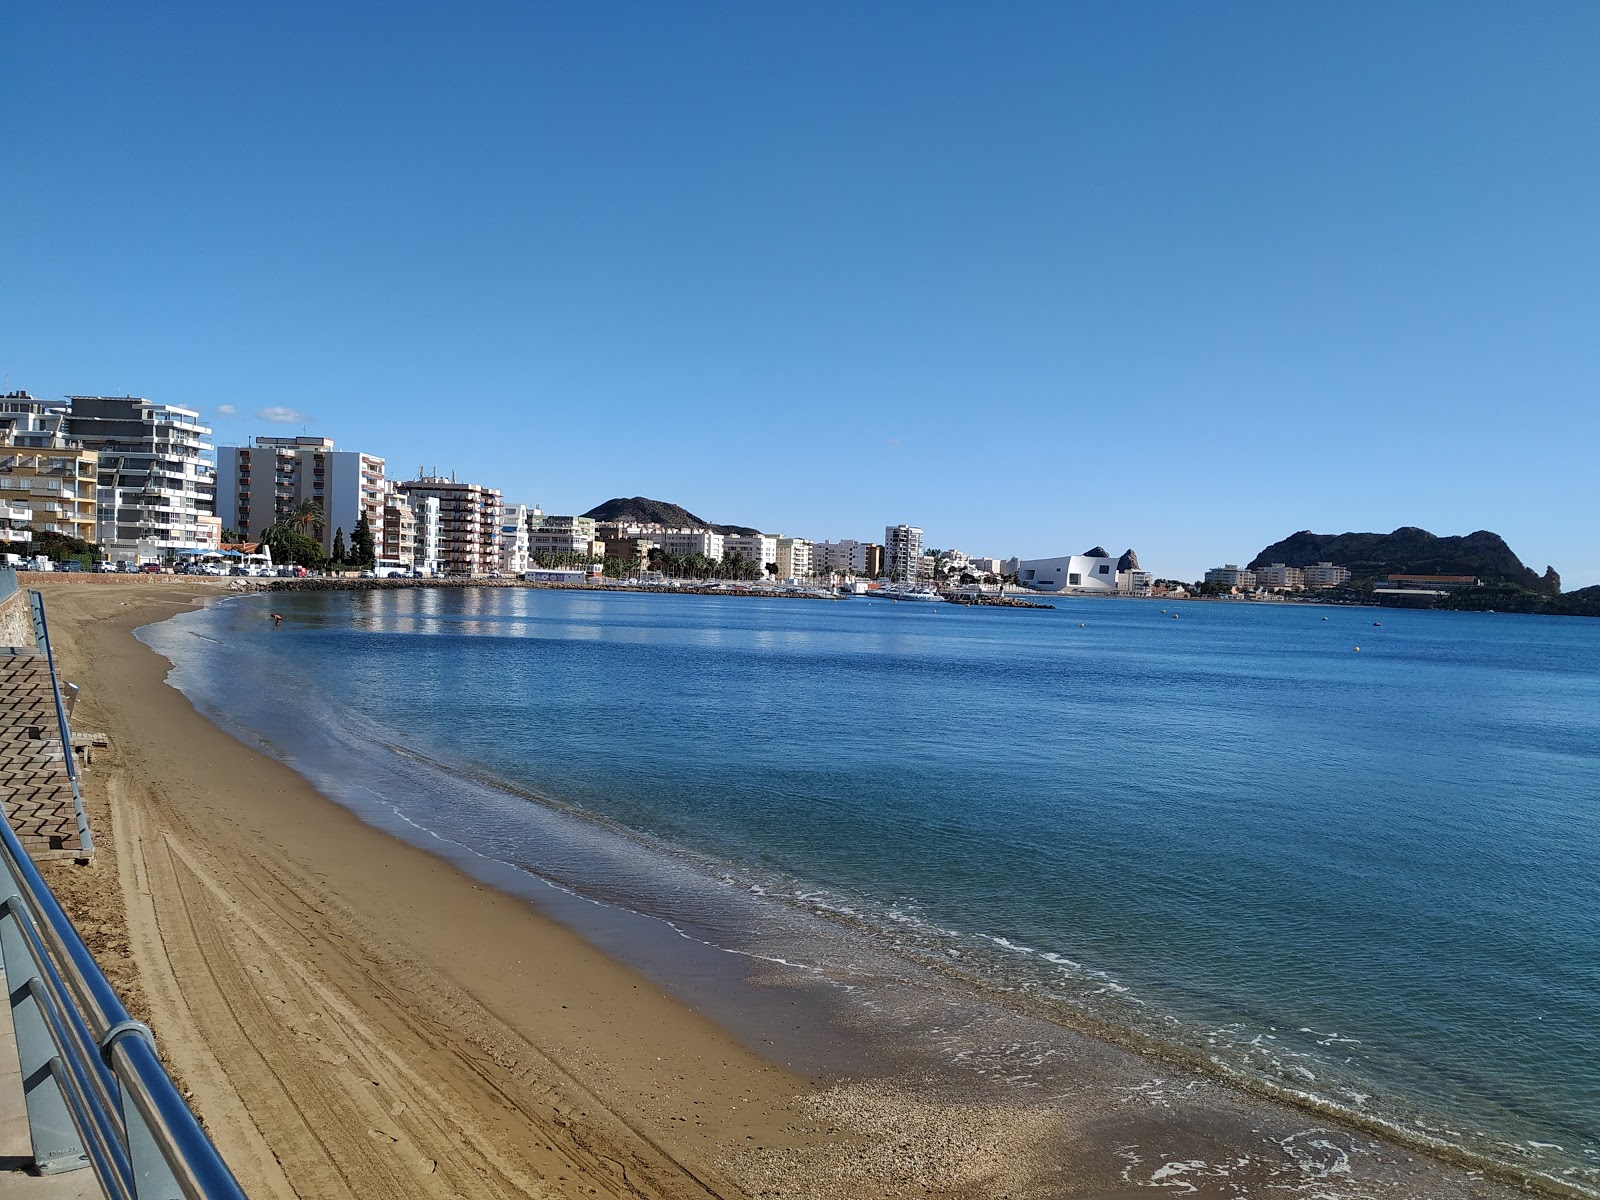 Photo of Playa de Levante with dark blue water surface